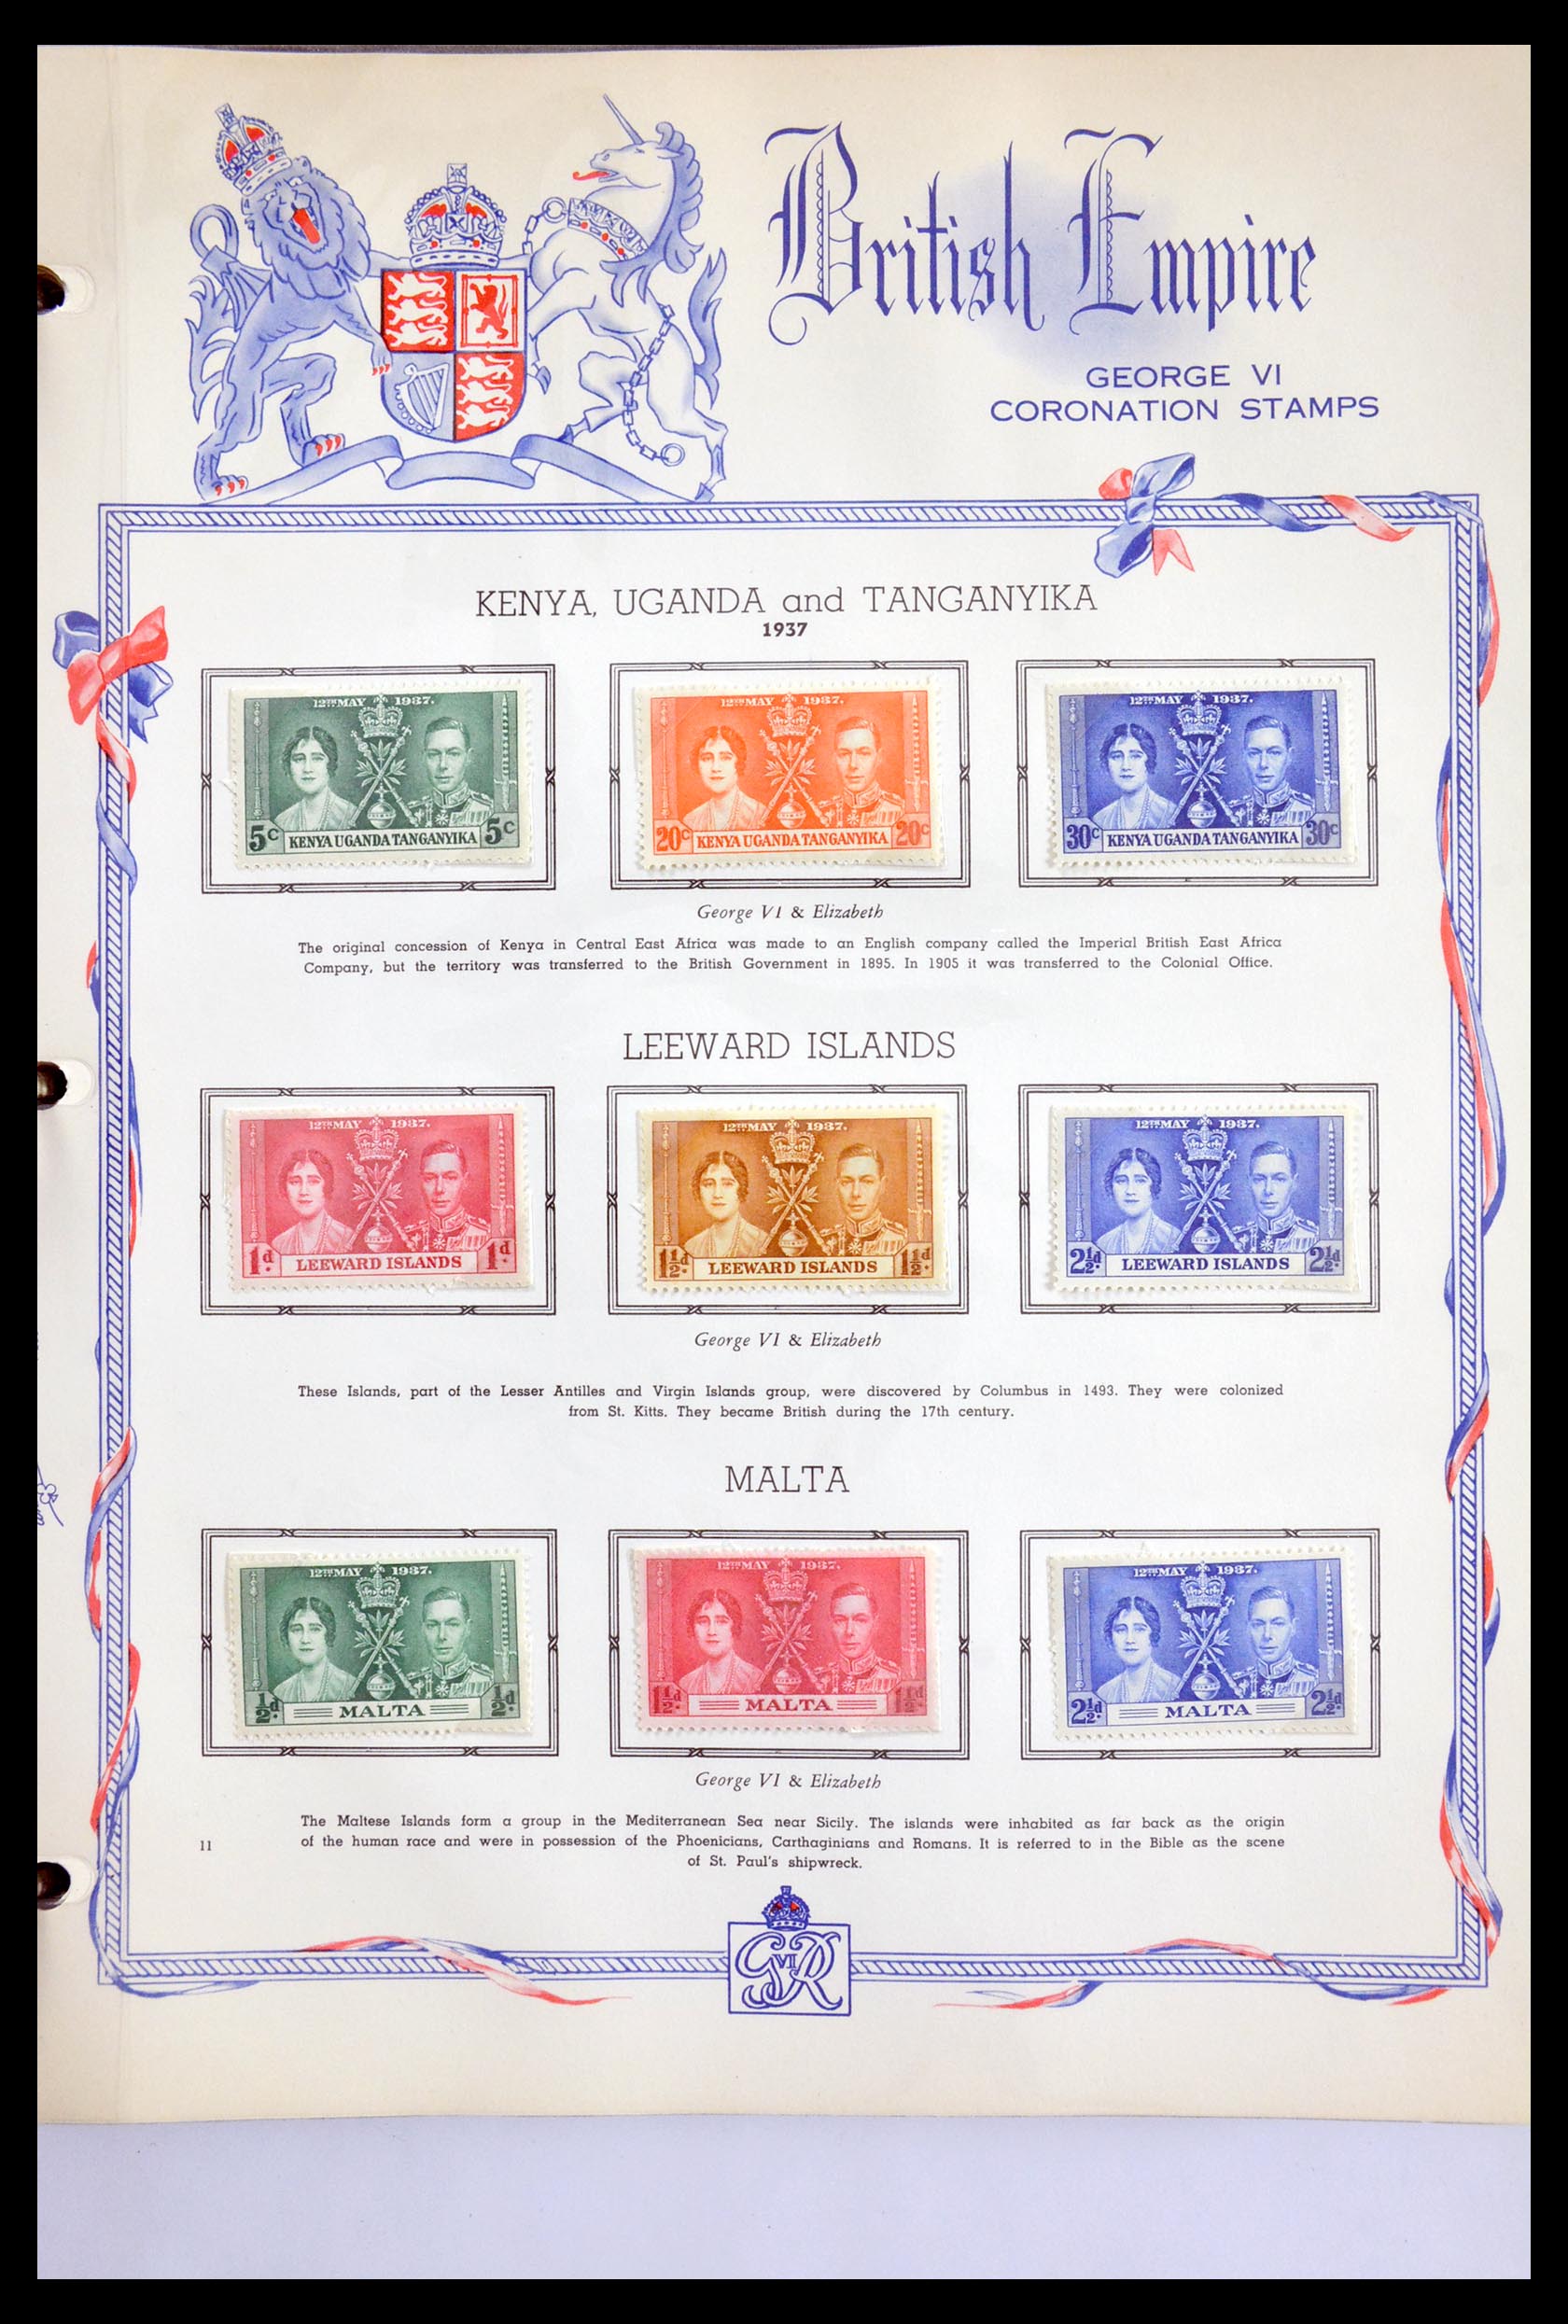 29940 011 - 29940 Great Britain and Colonies 1920-1970.